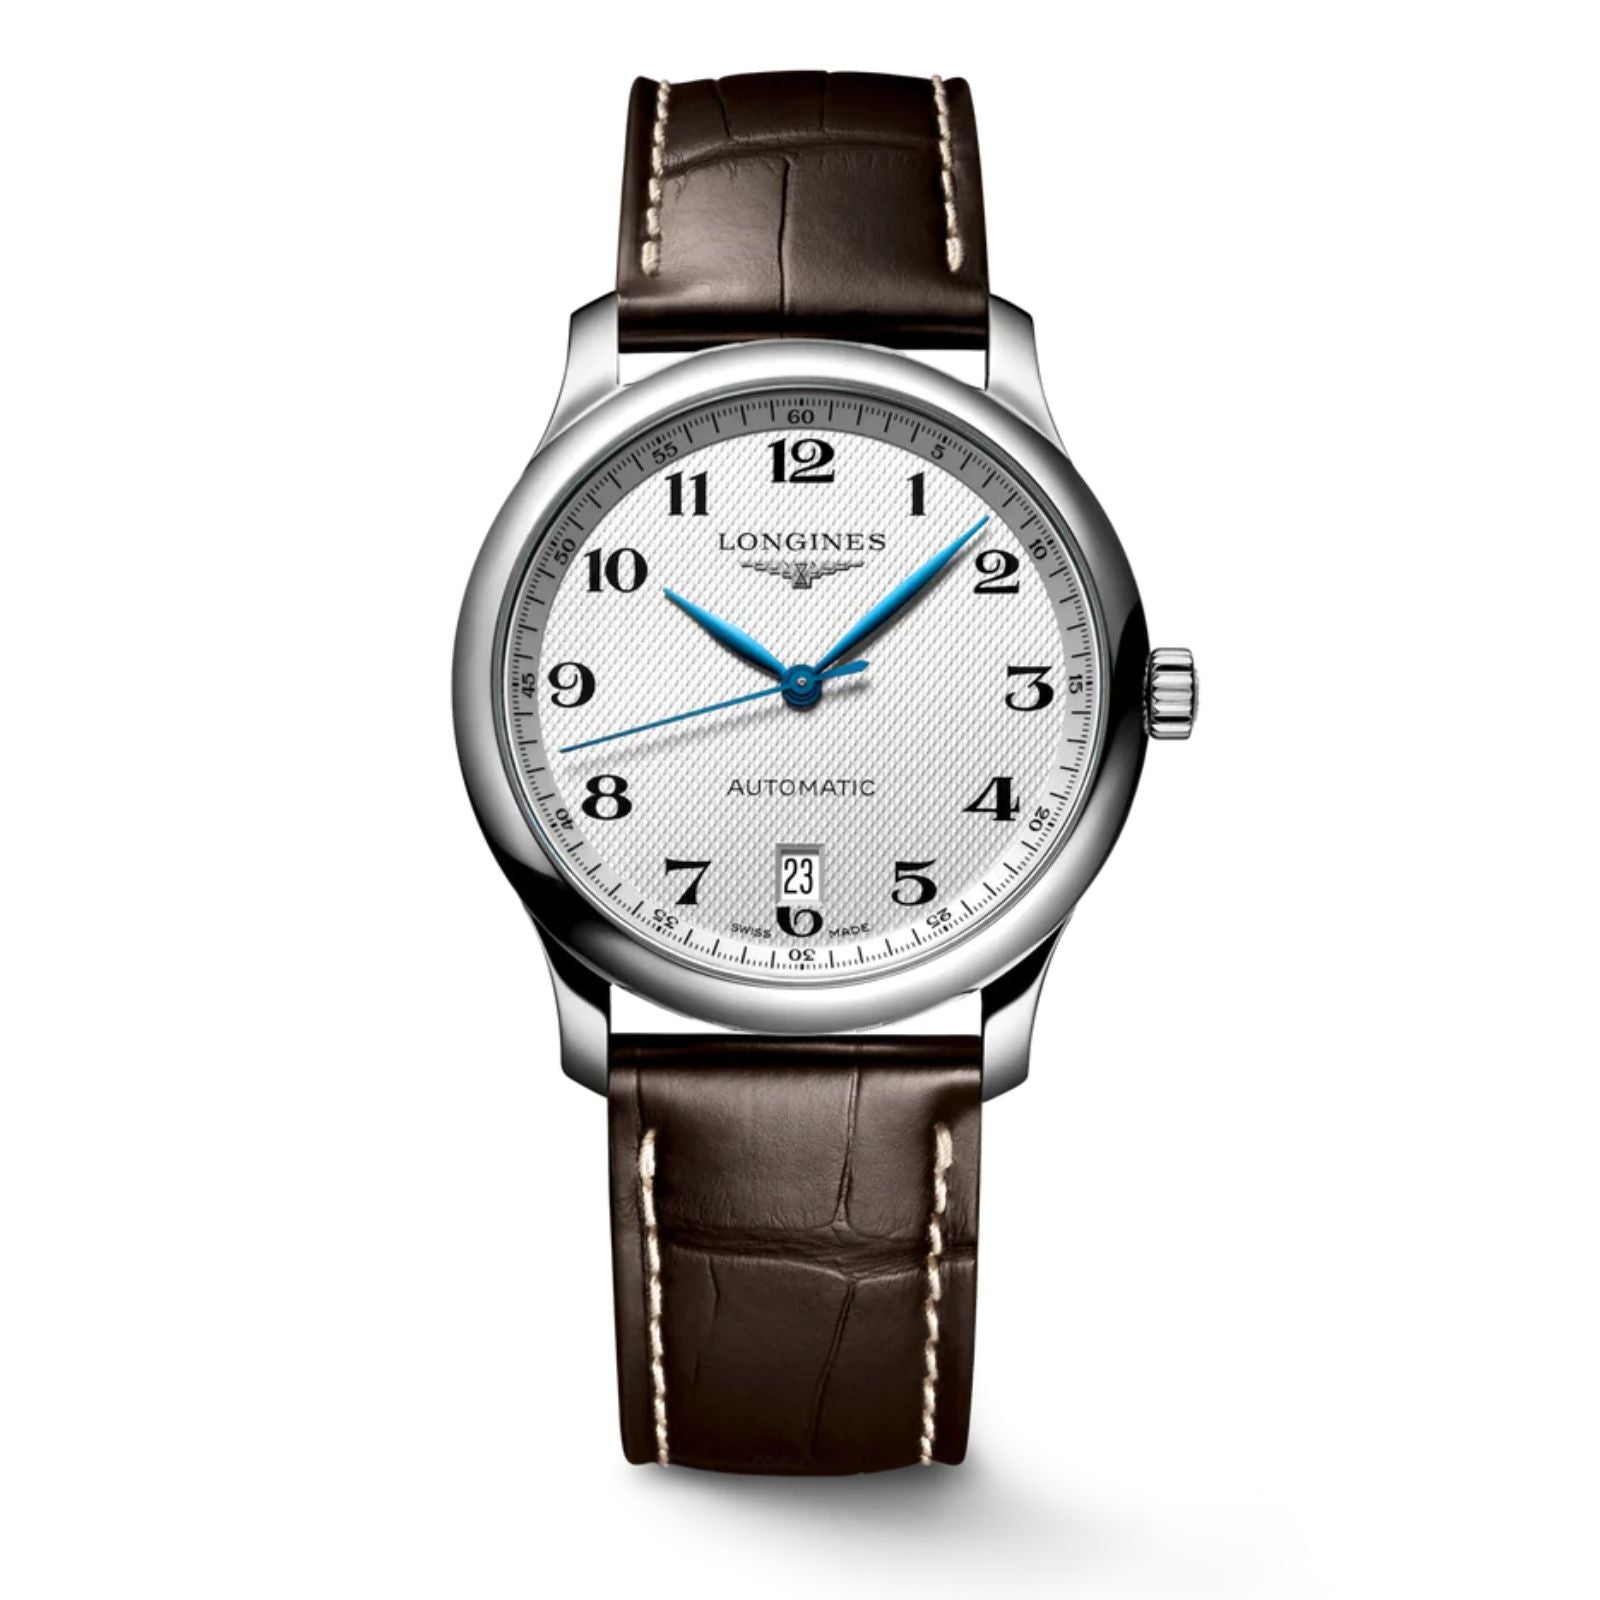 The Longines Master Collection Watch L26284783 – Mazzucchelli's